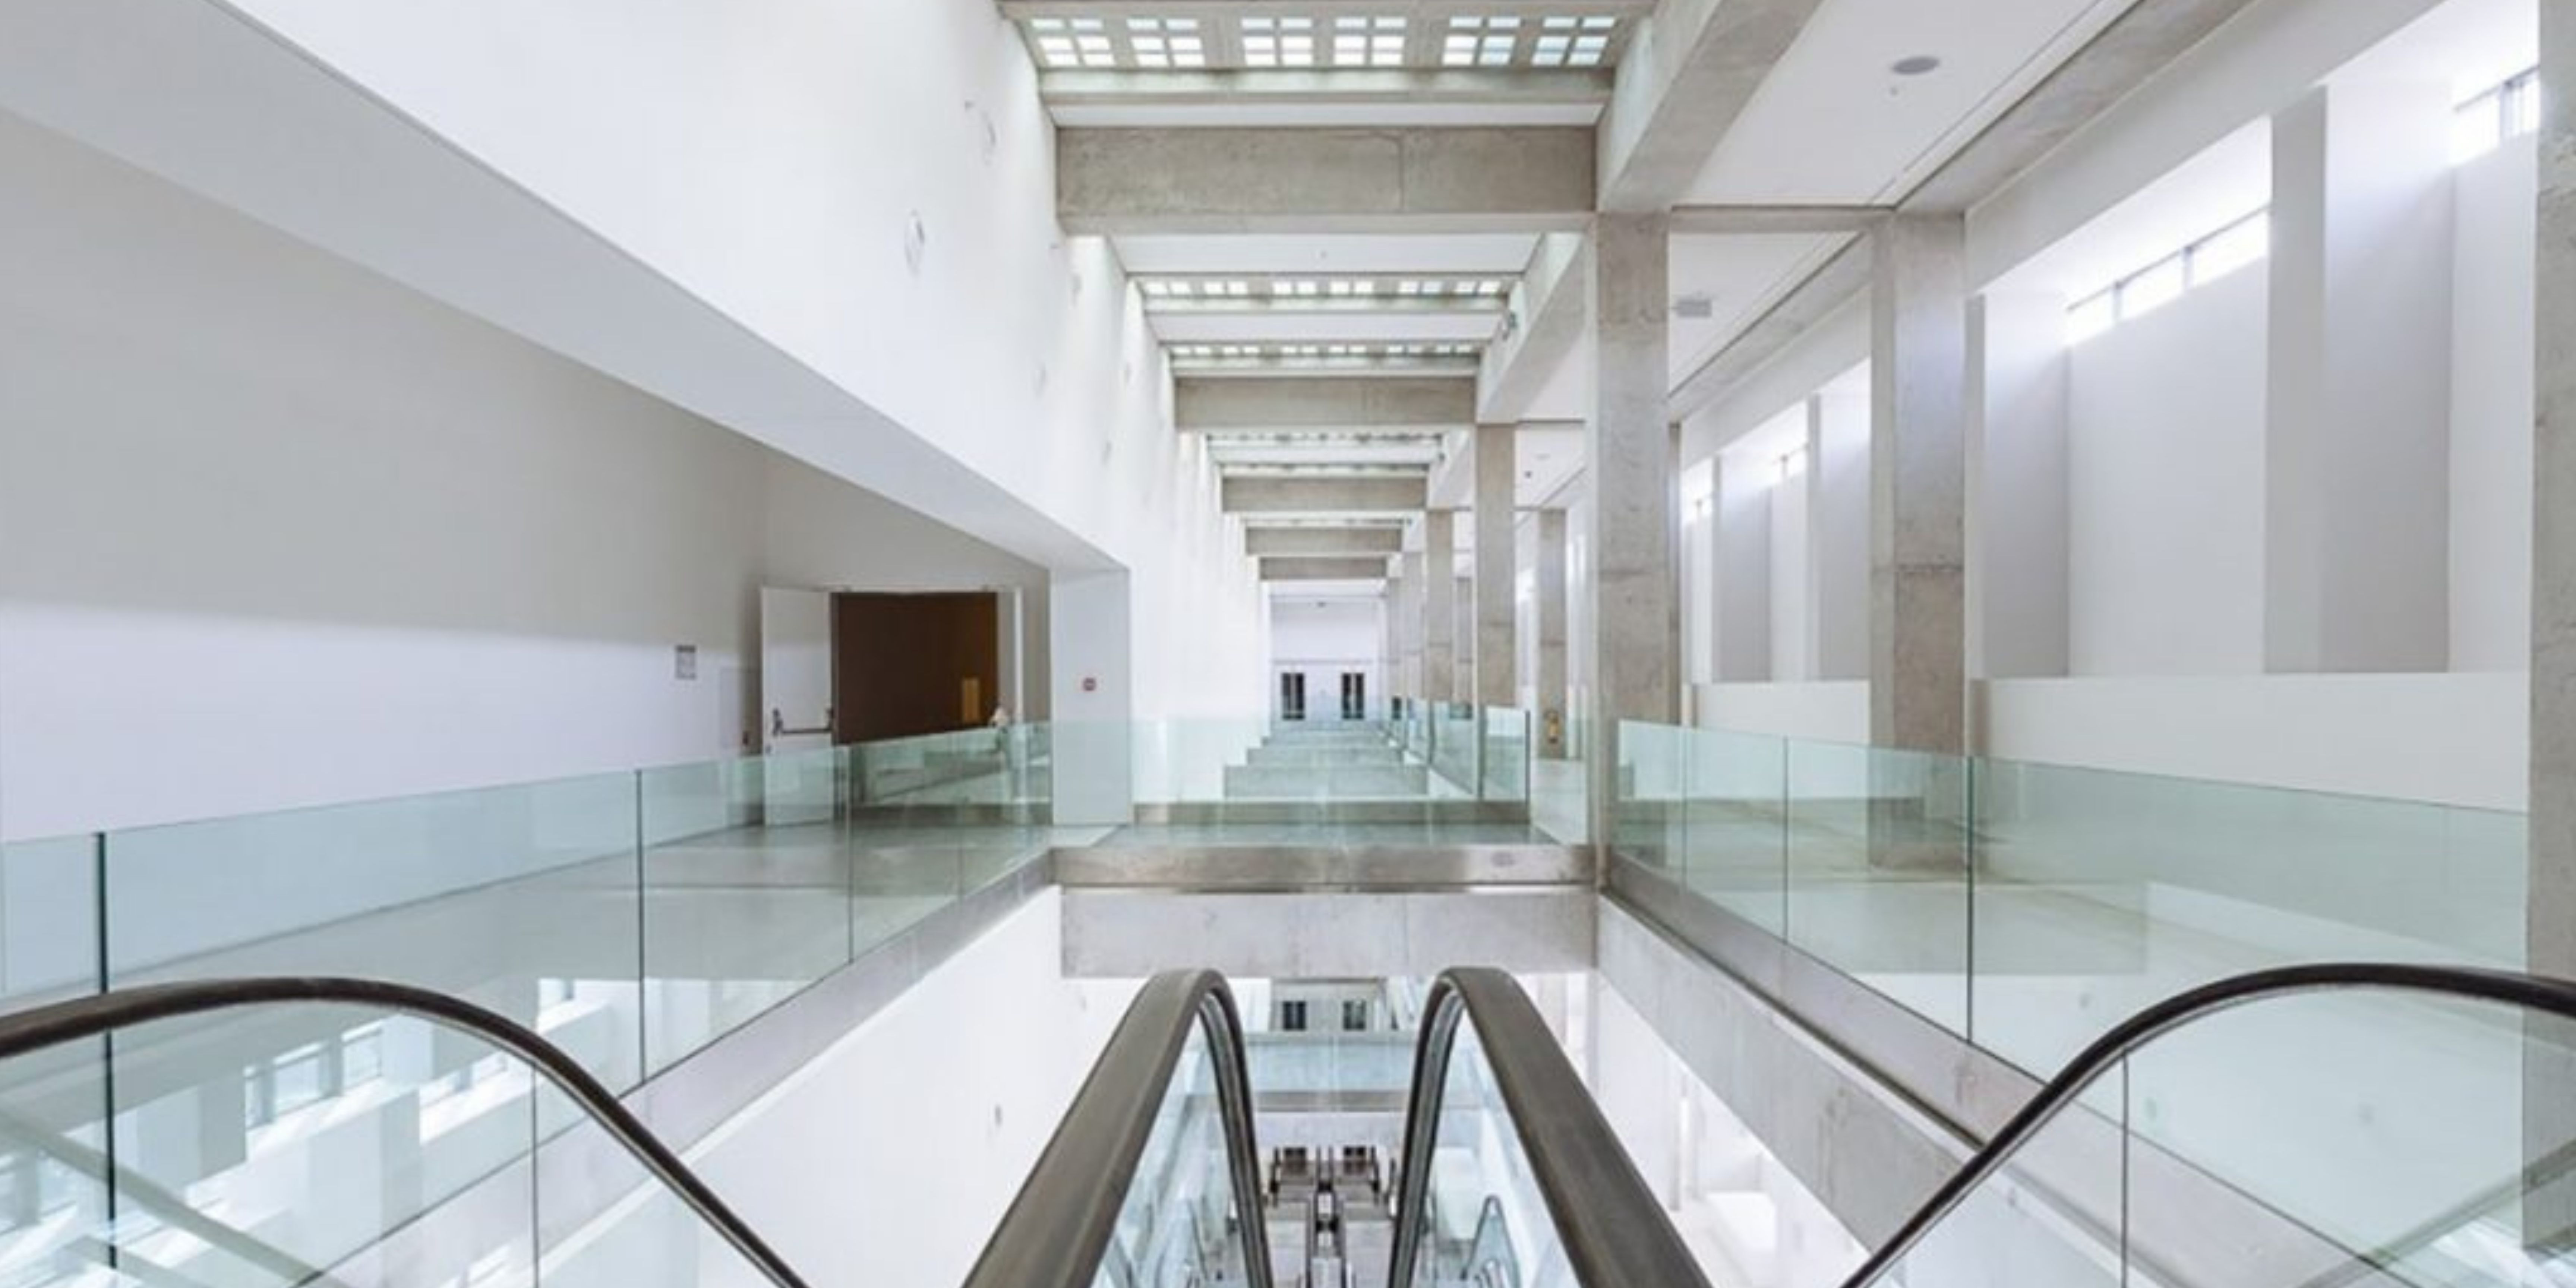 Modern interior of the National Museum of Contemporary Art in Athens, viewed from an escalator.